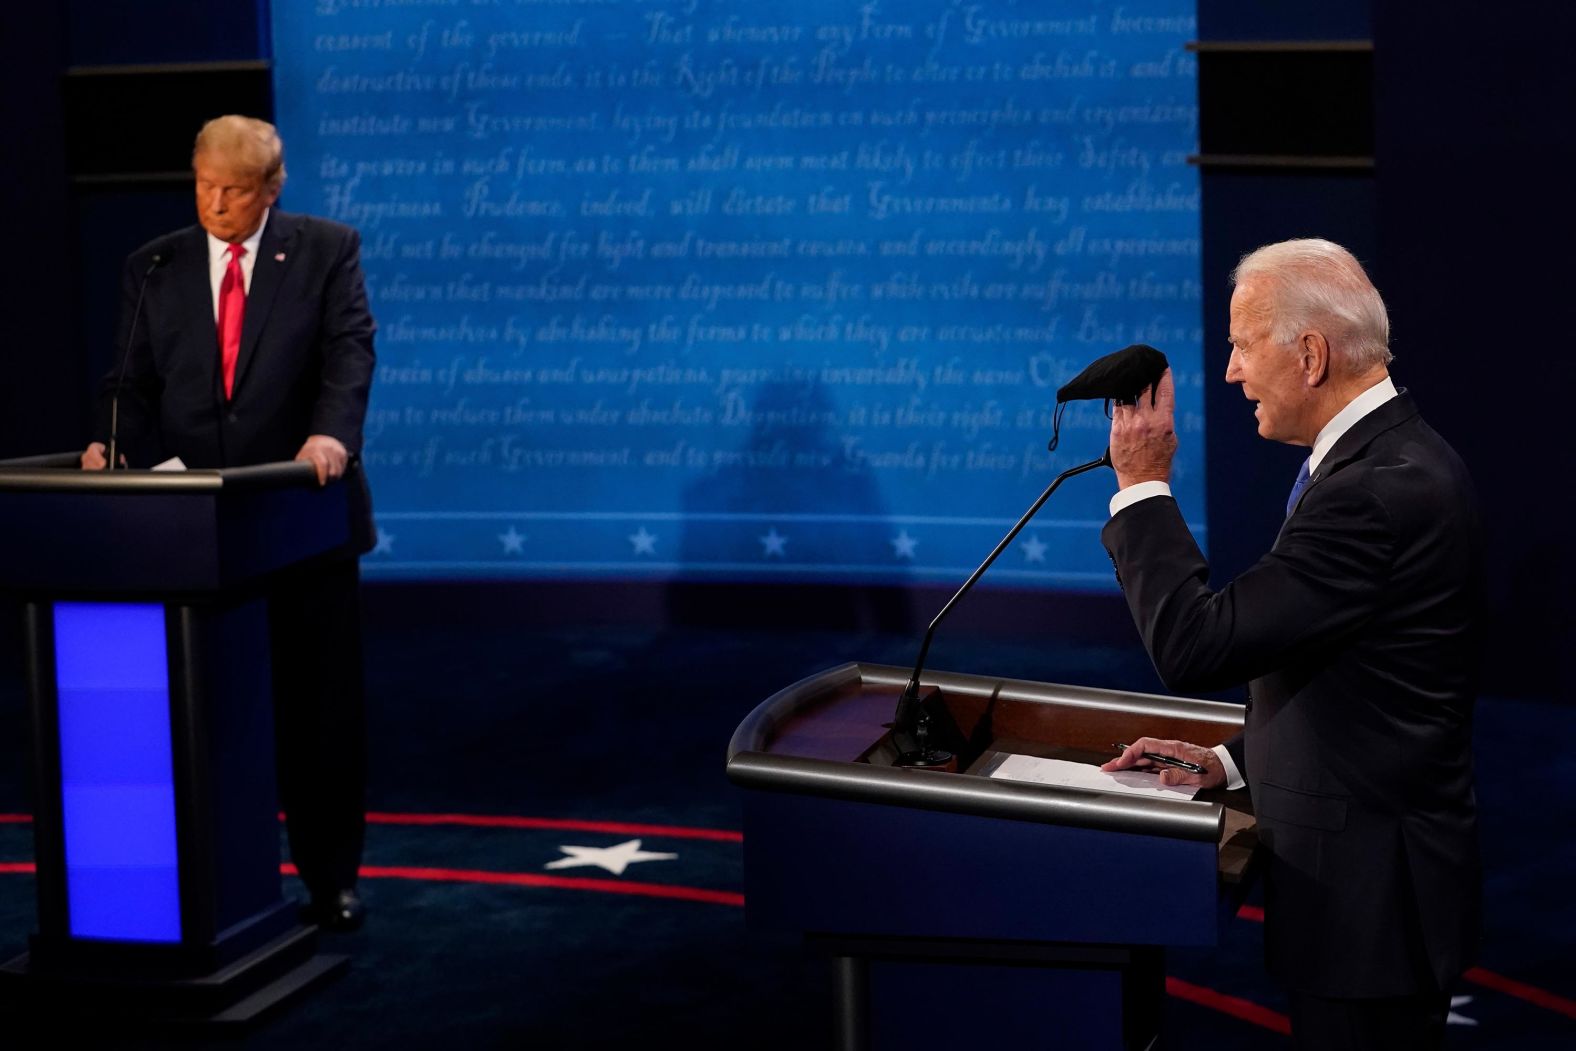 Biden holds up a mask as Trump takes notes during the debate section about Covid-19.